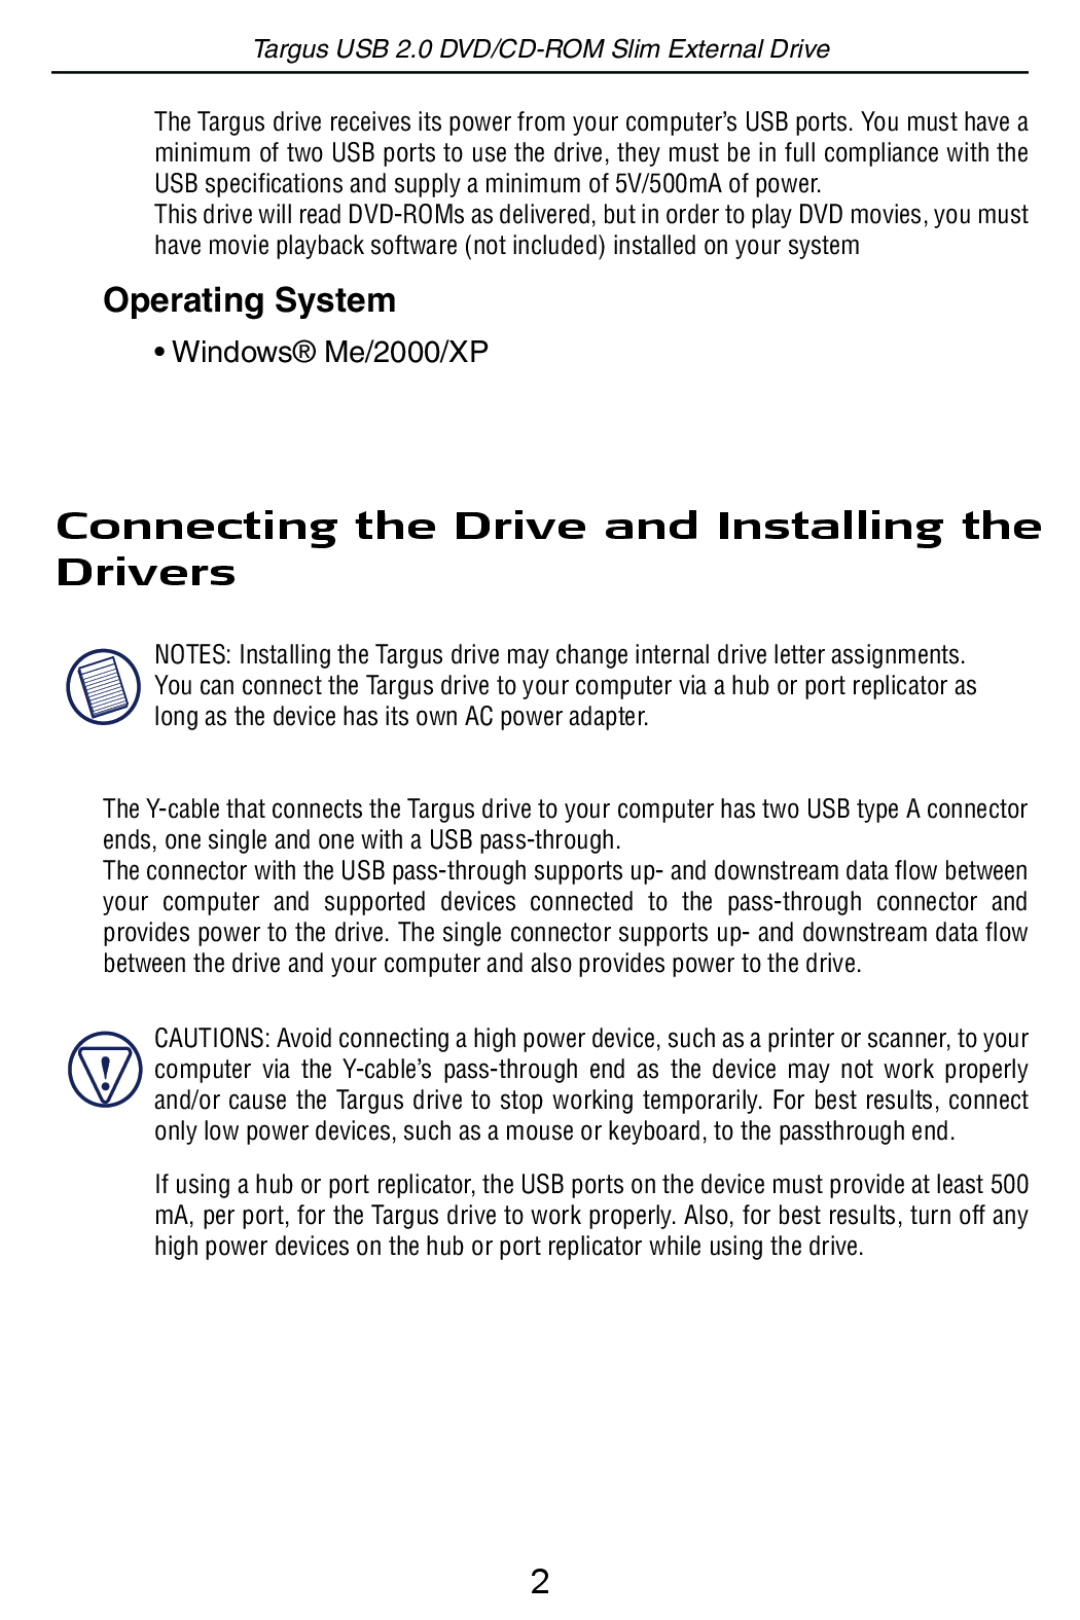 Targus USB 2.0 DVD/CD-ROM Slim External Drive Connecting the Drive and Installing the Drivers, Operating System 